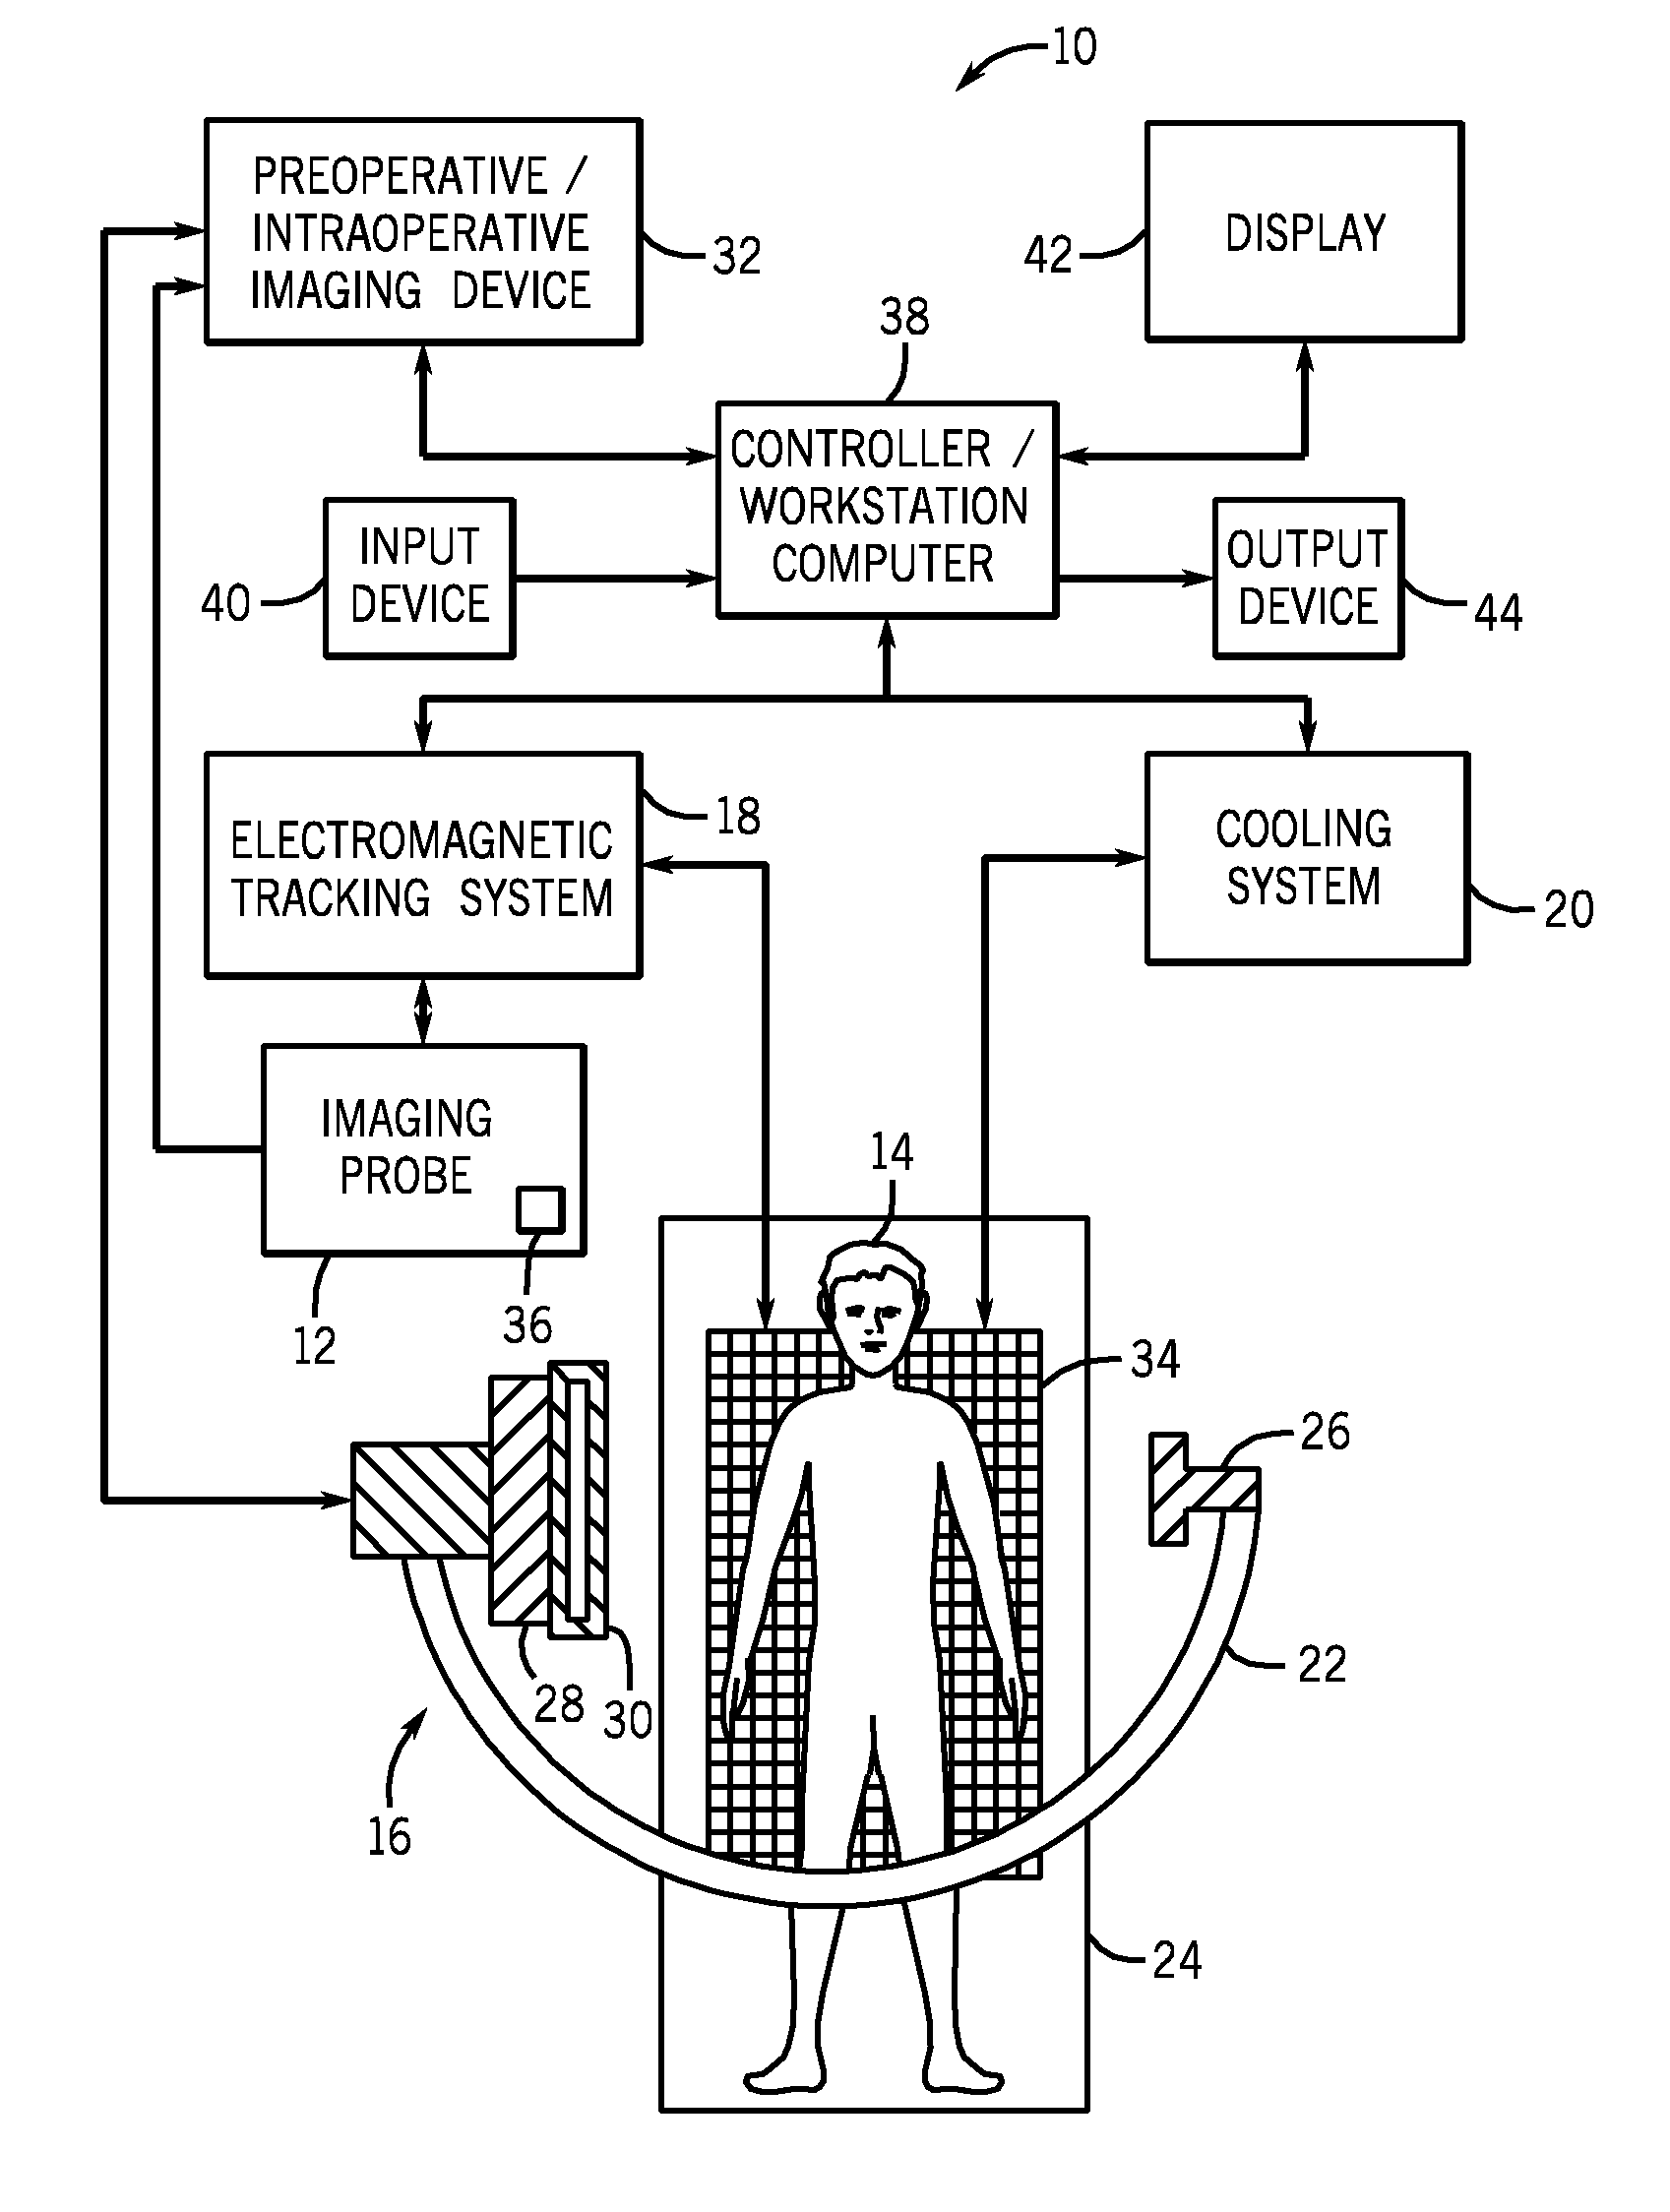 System and method for cooling components of a surgical navigation system